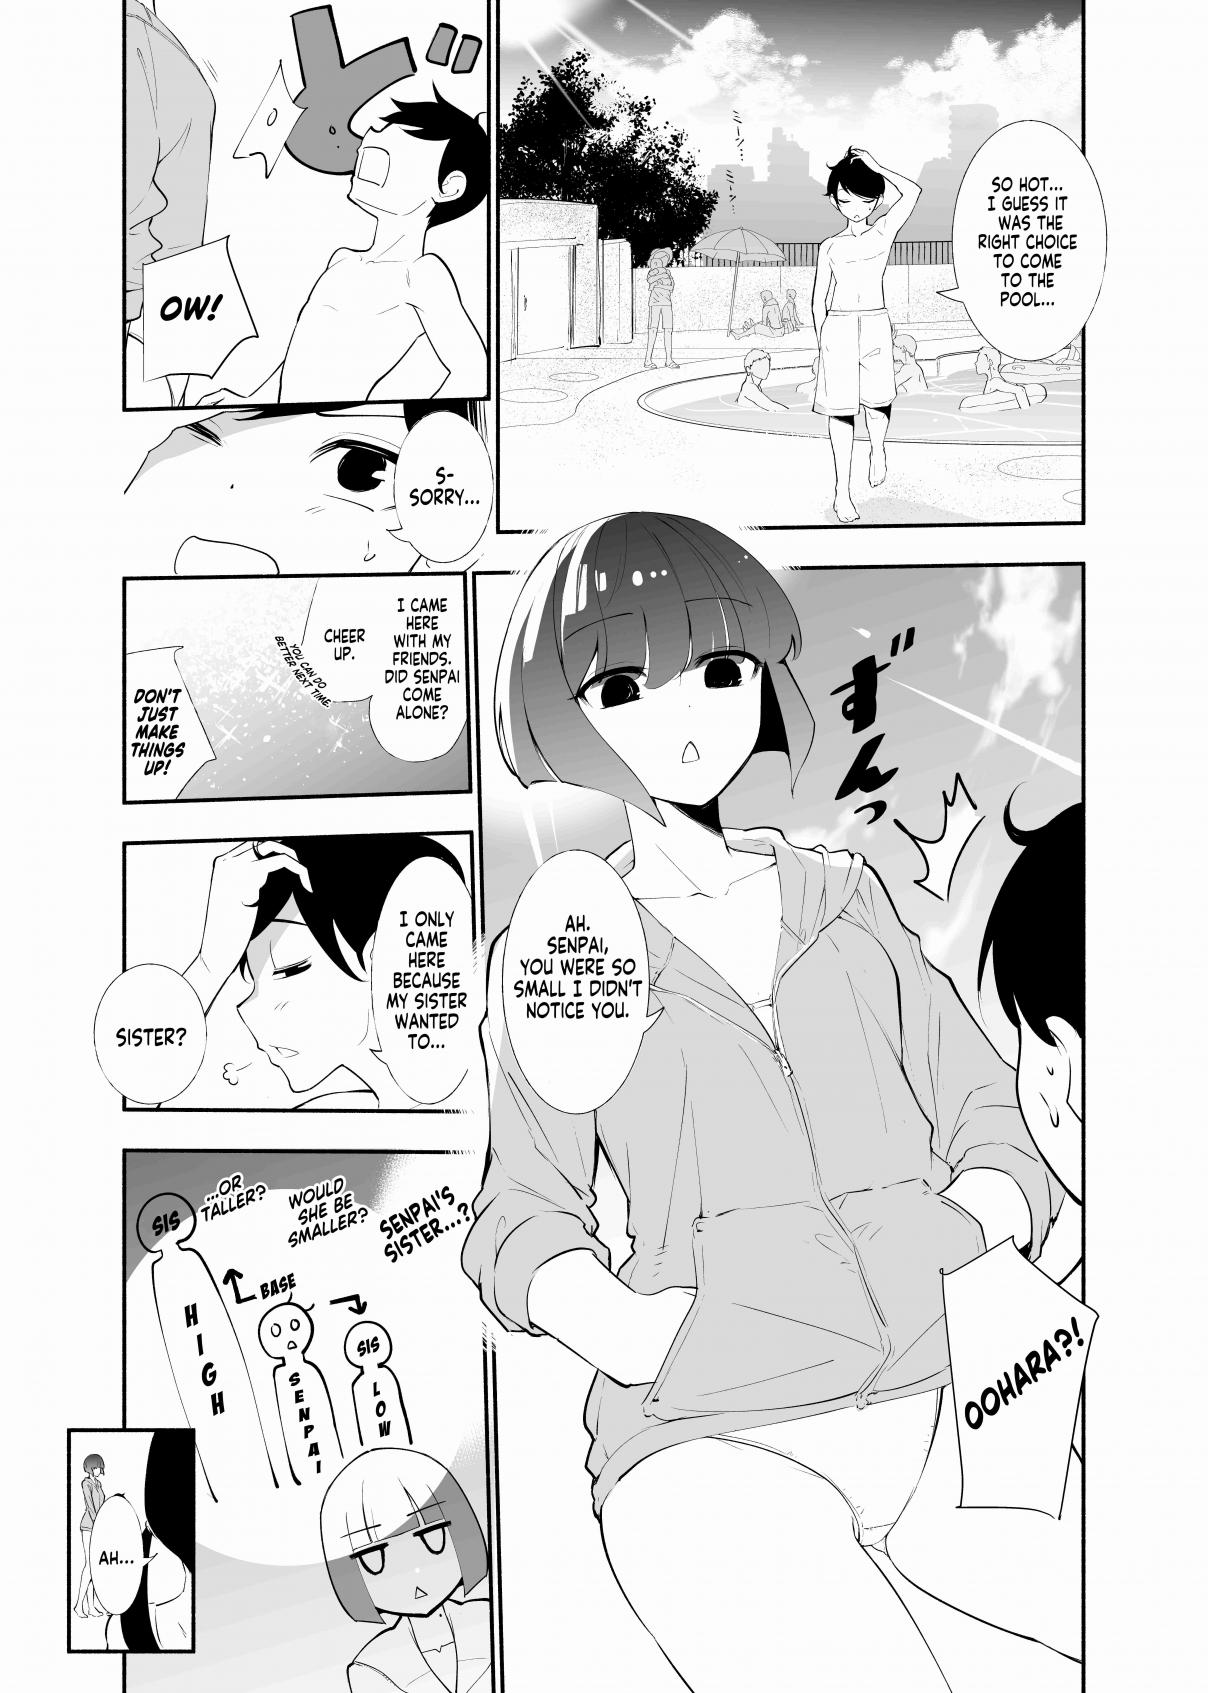 Until the Tall Kouhai (Girl) and the Short Senpai (Boy) Relationship Develops Into Romance Vol. 1 Ch. 5 Kouhai, Pool & Younger Sister